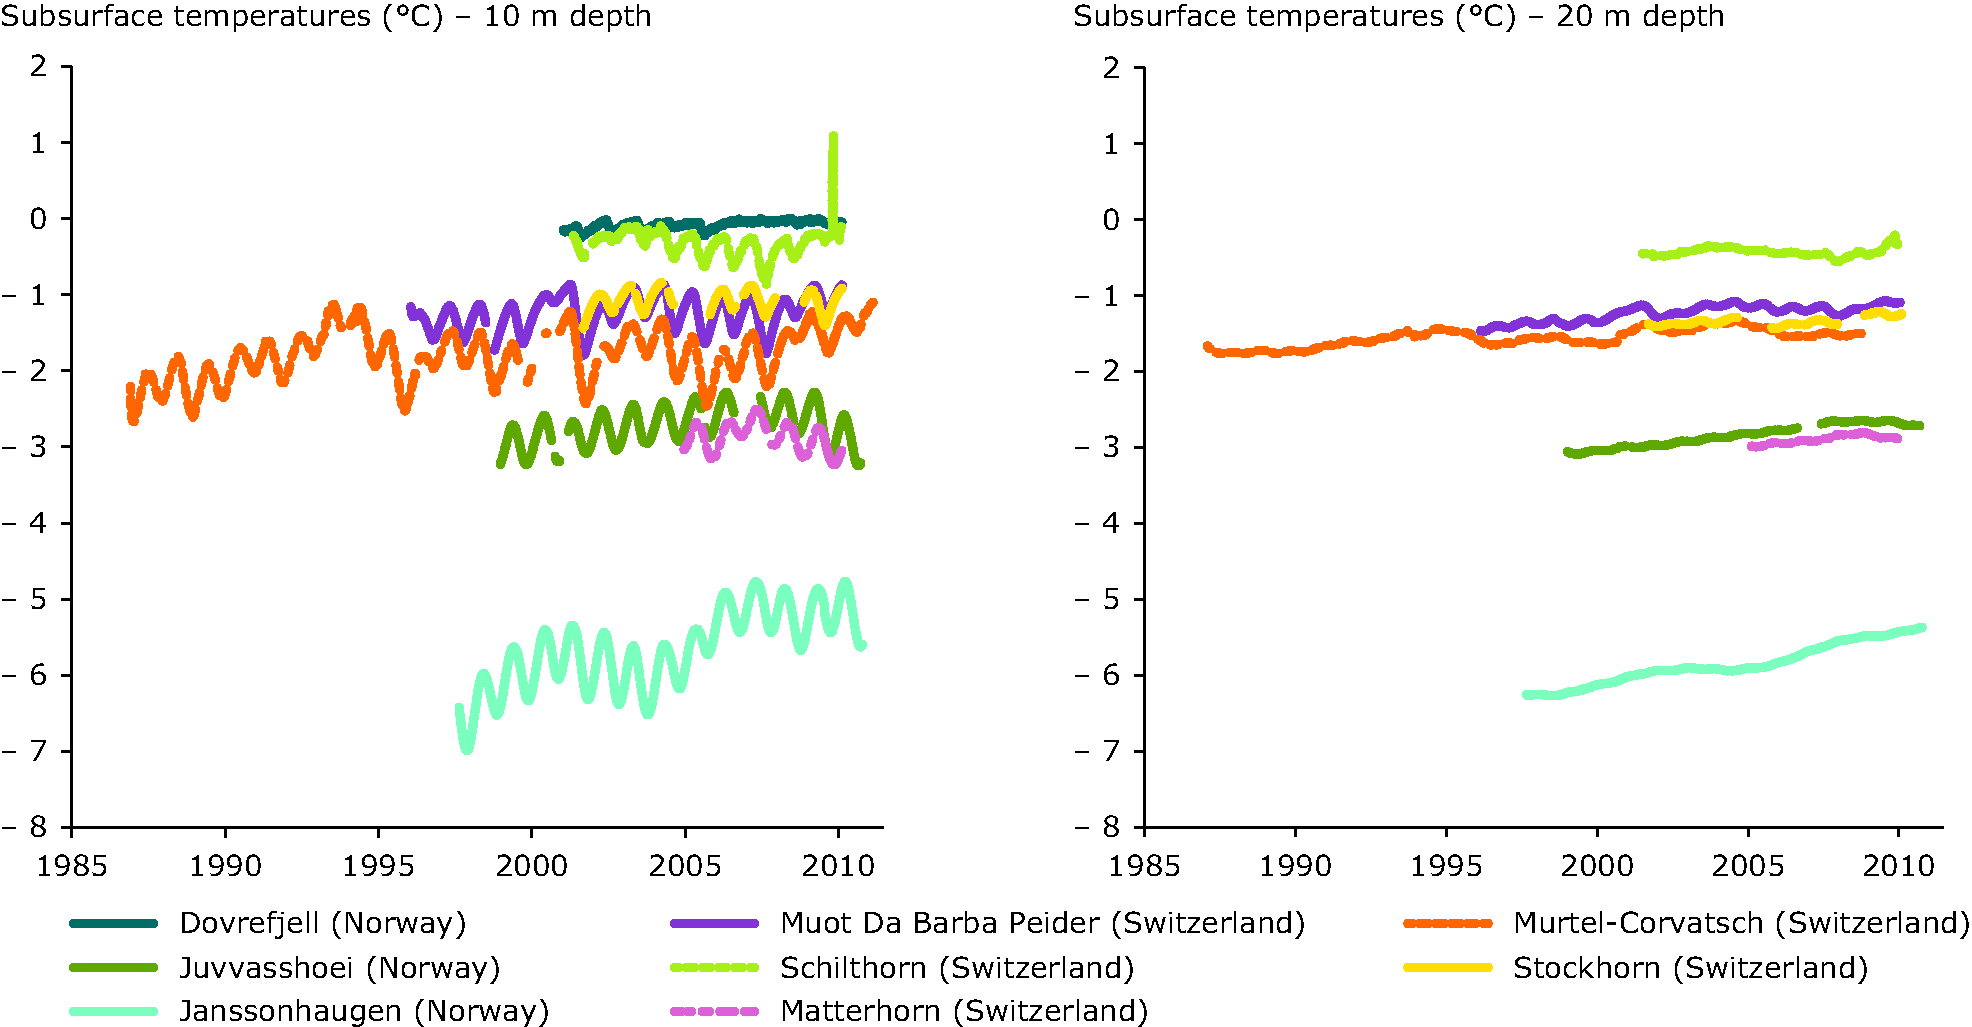 Observed permafrost temperatures from selected boreholes in European mountains 